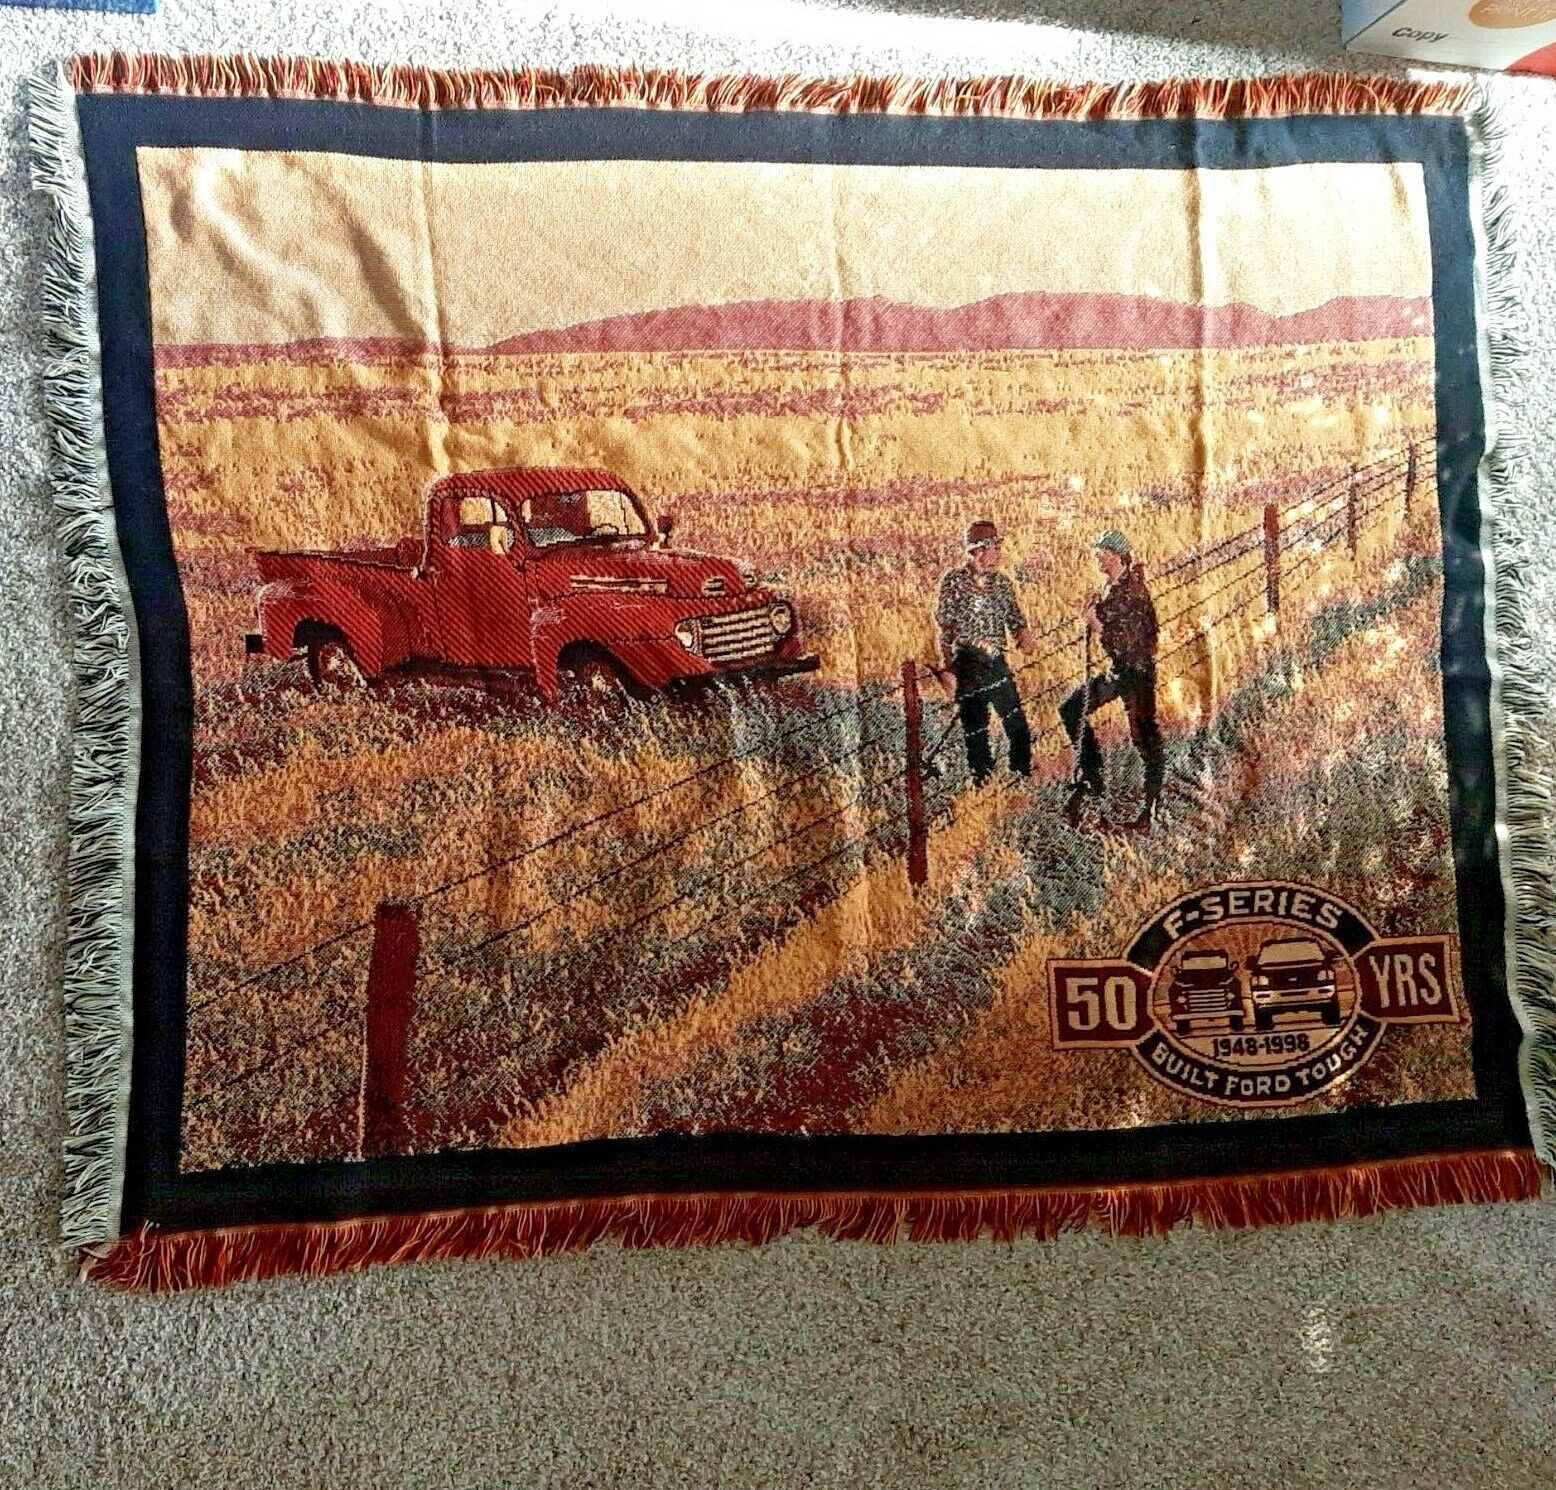 Primary image for Ford F-Series Tapestry Afghan Blanket Celebrating 50 Yrs 1948-98 Commemorative